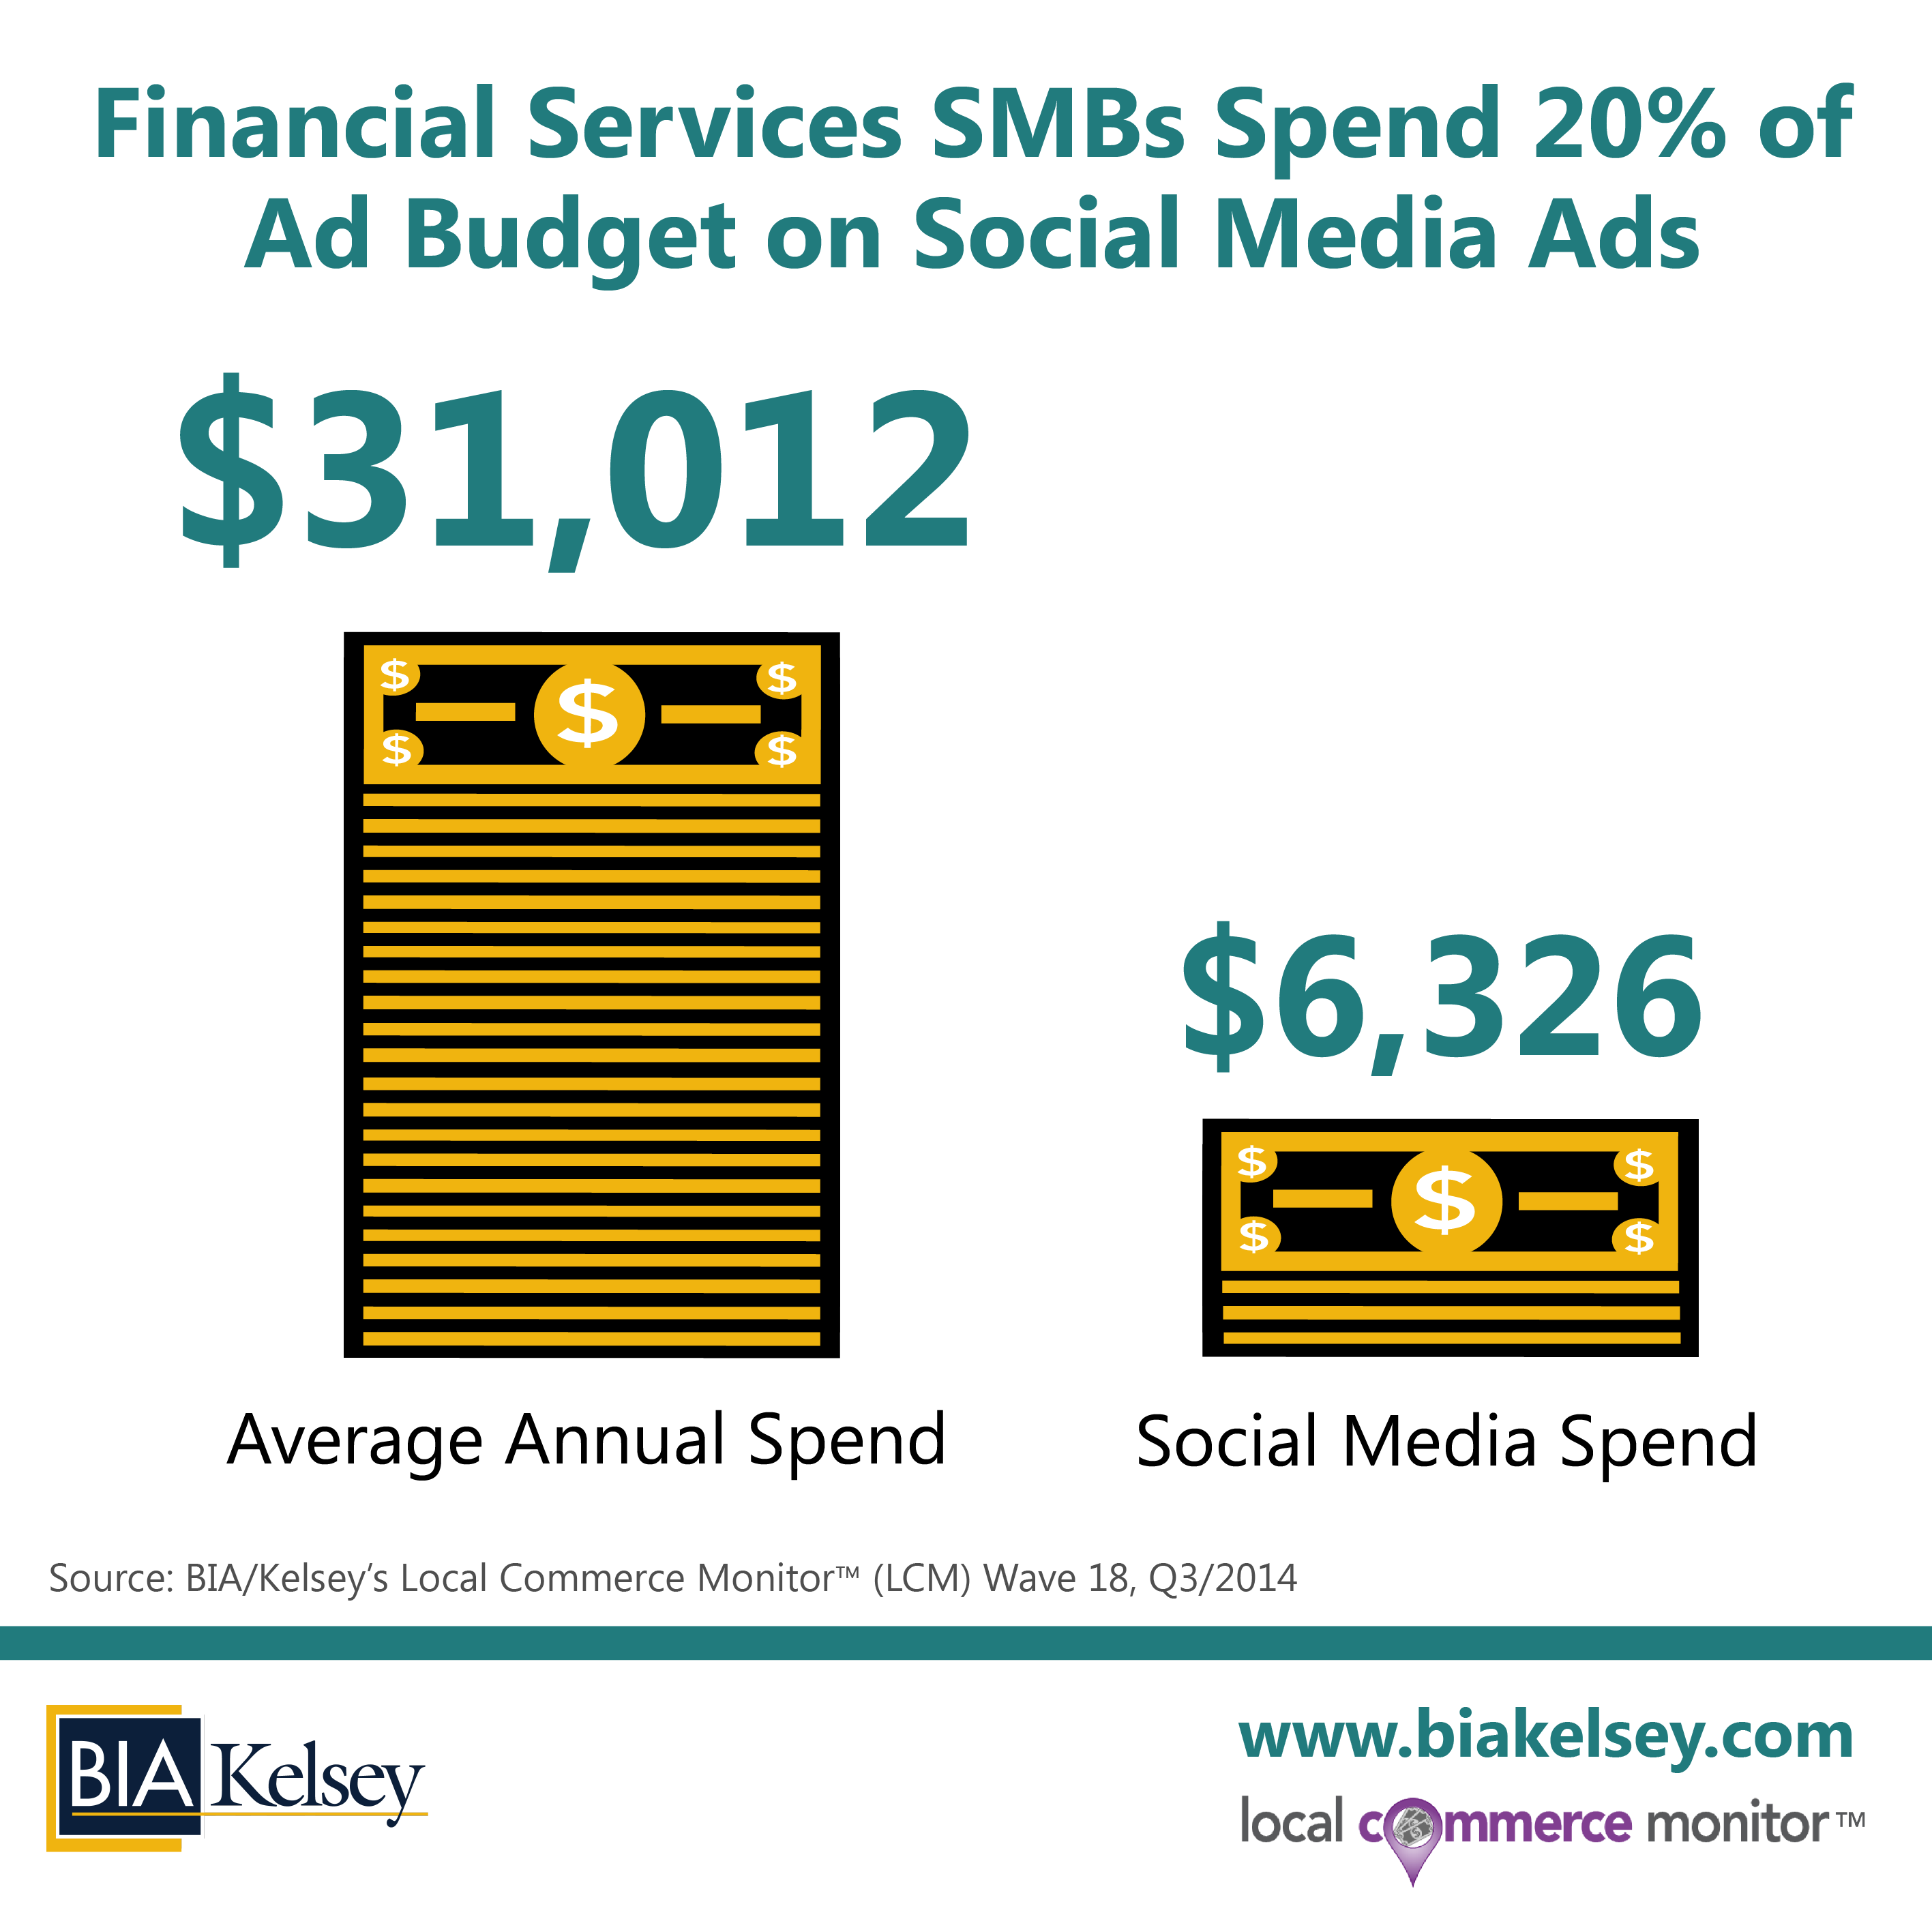 Financial Services SMBs Use A Mix Of Social, Digital And Traditional Media